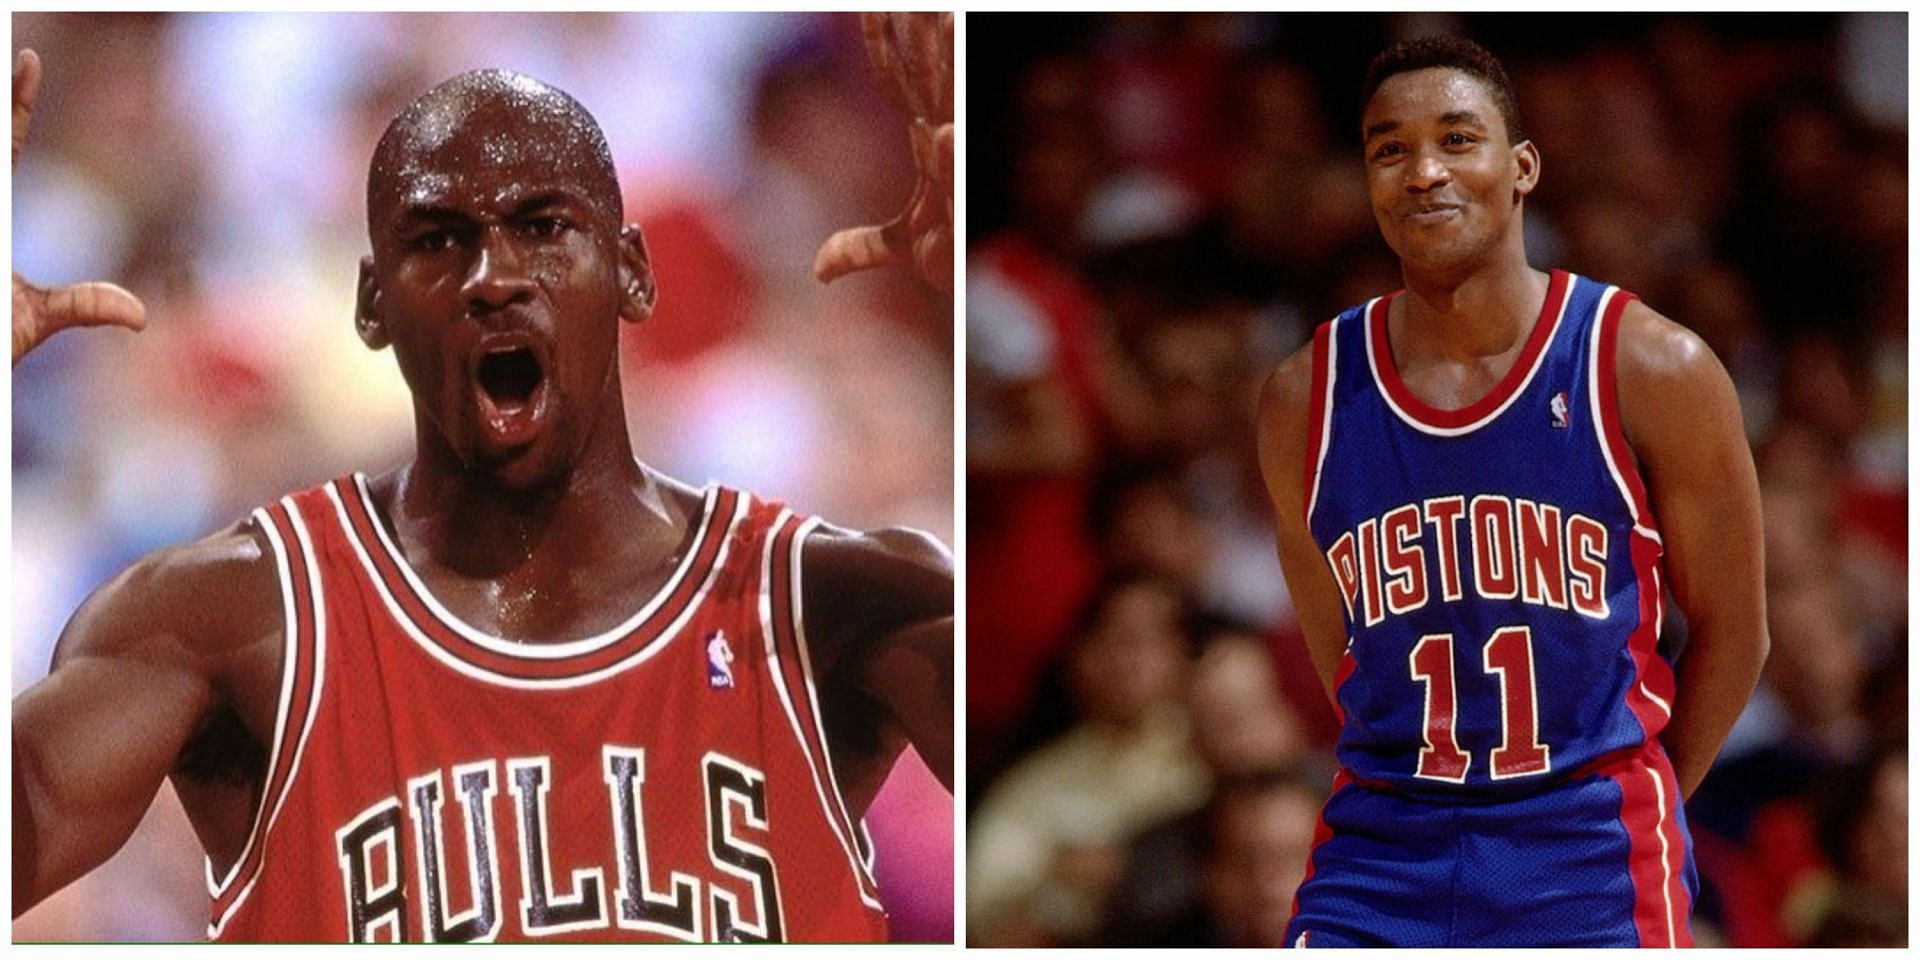 Isiah Thomas shares he has no knowledge about his beef with Michael Jordan